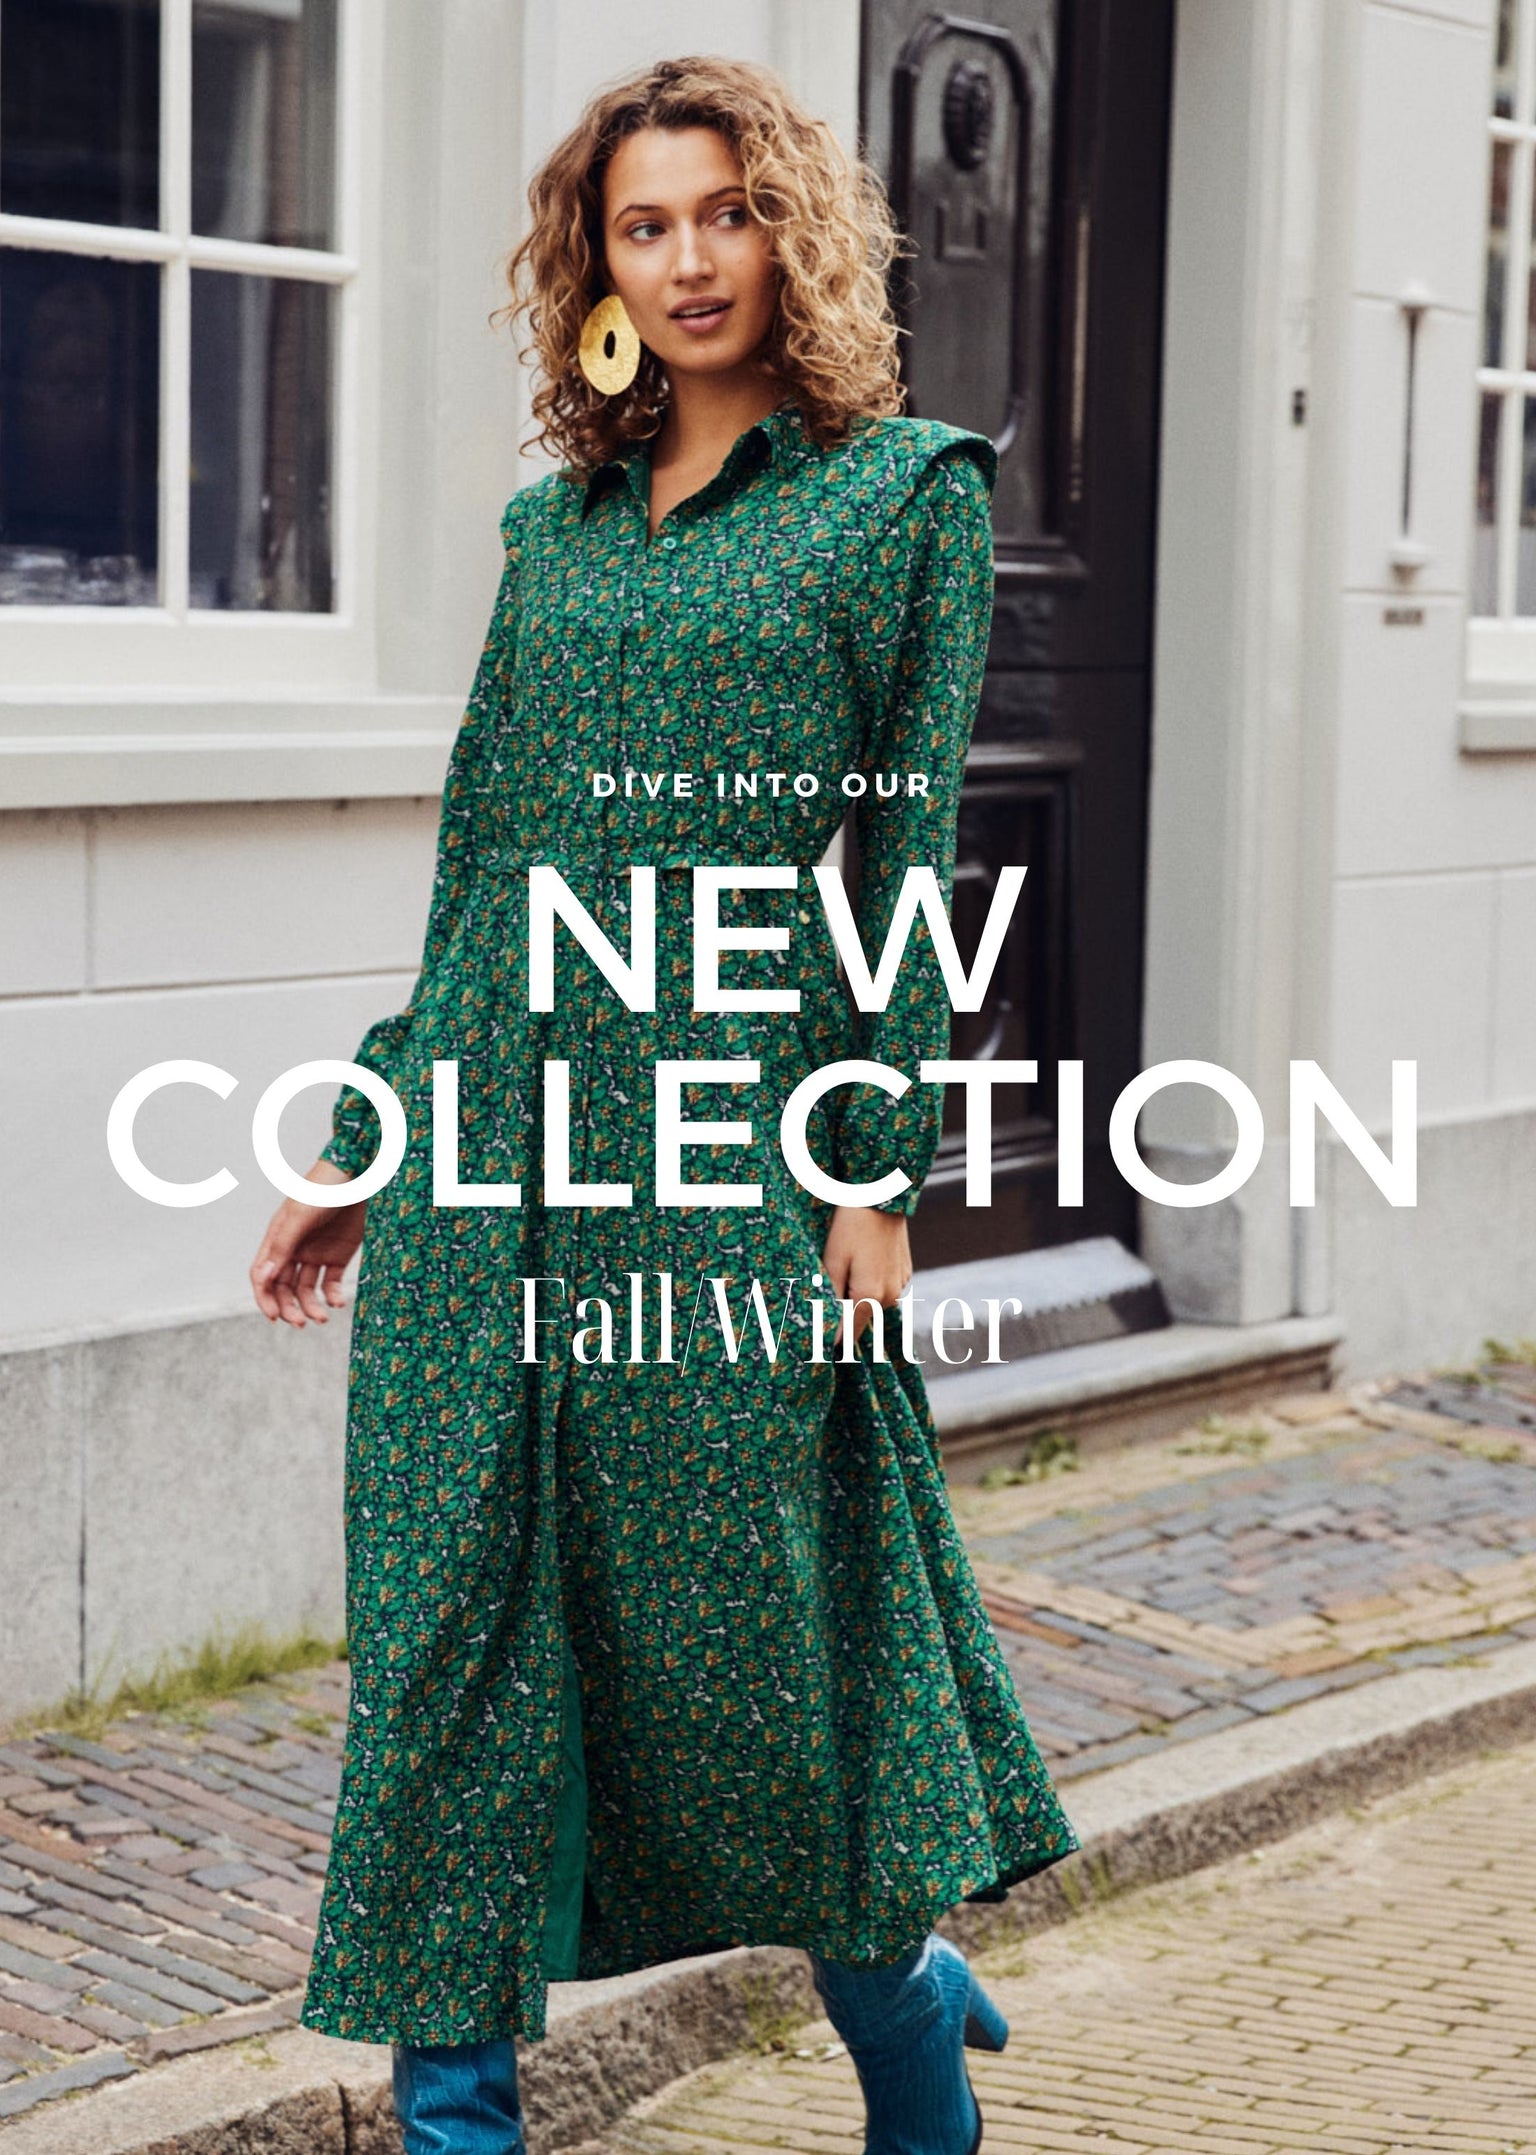 SHOP THE NEW COLLECTION